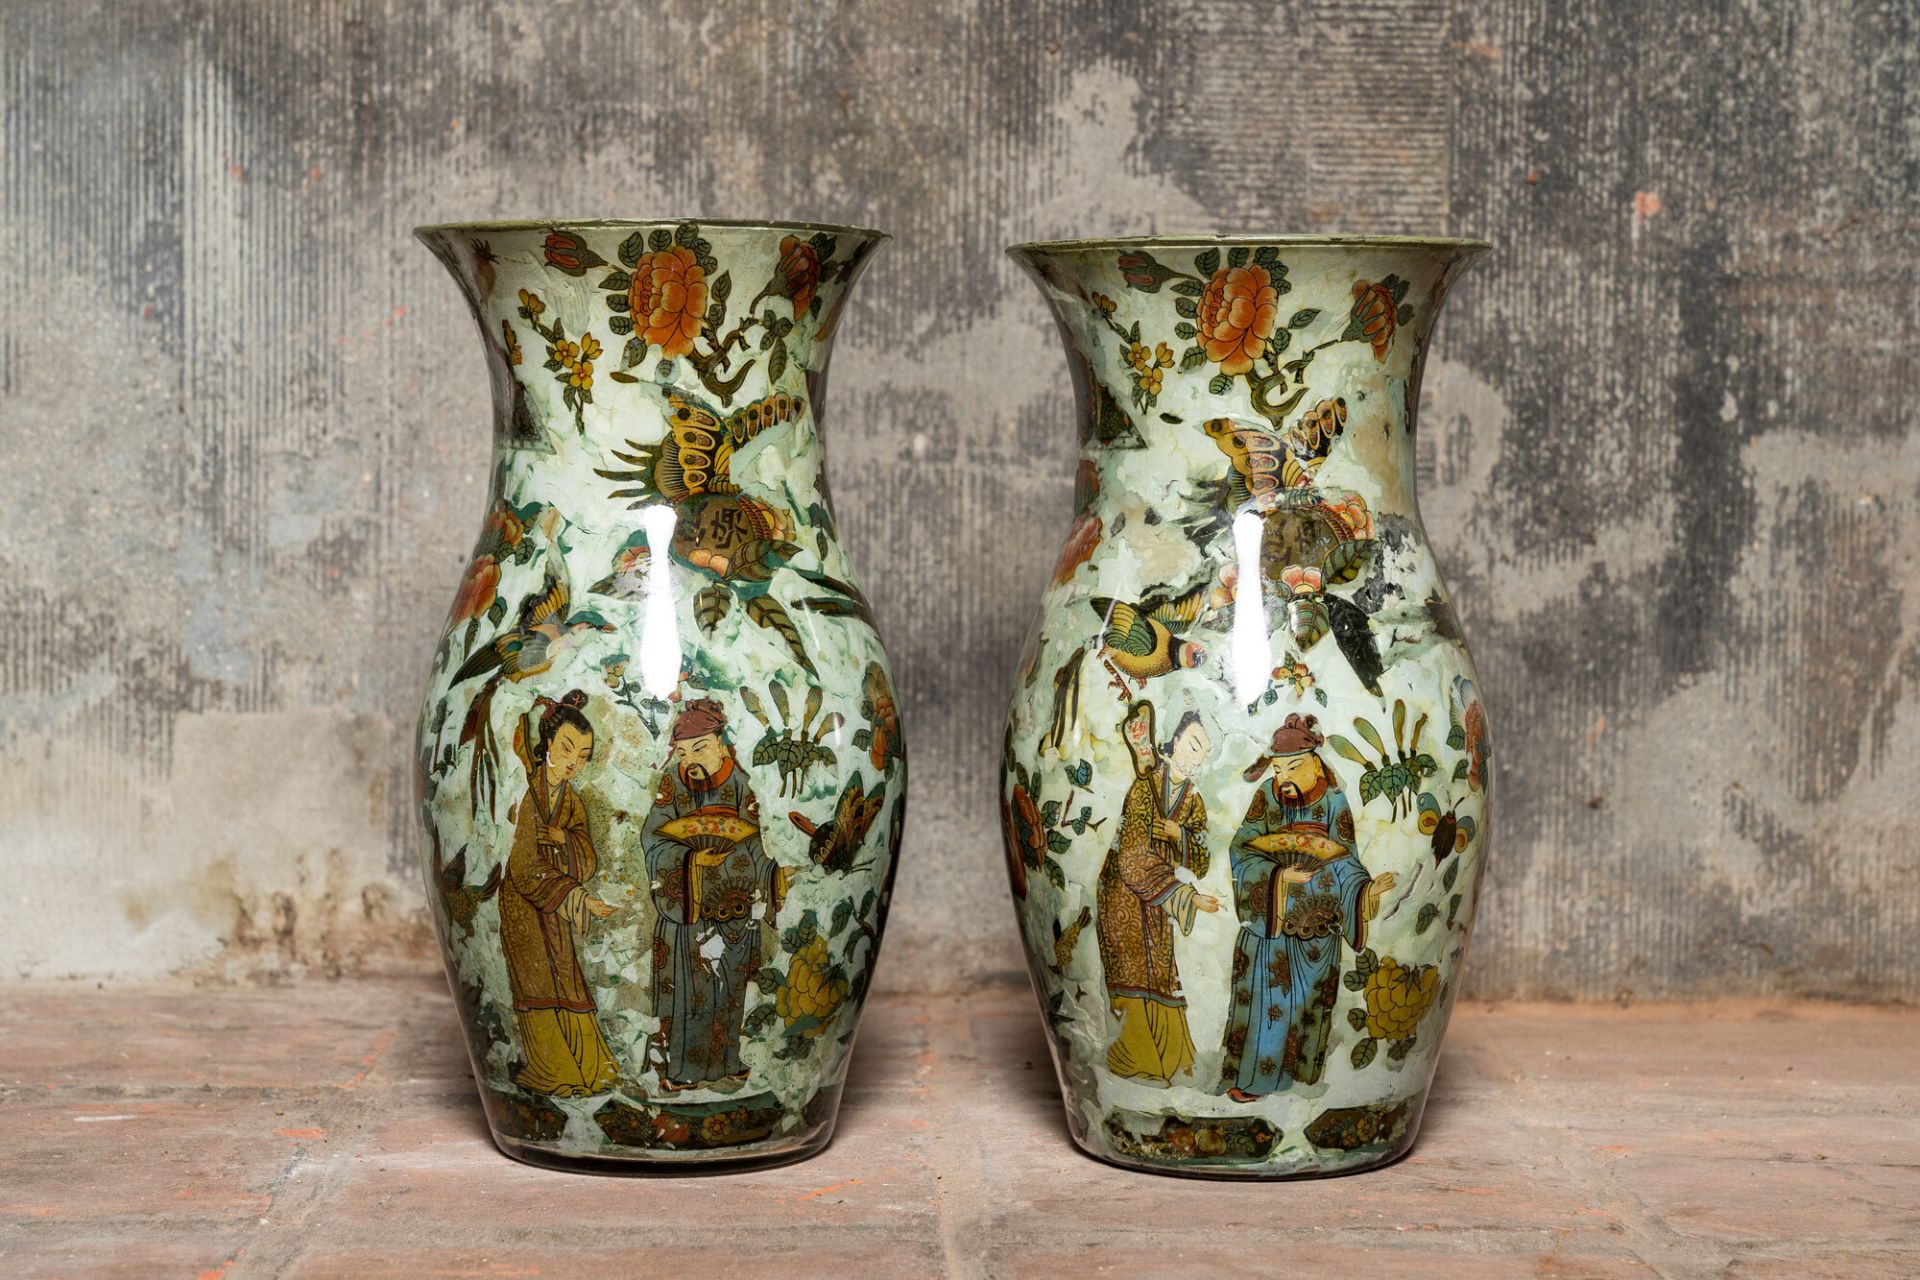 A pair of French or English glass decalcomania chinoiserie vases, 19th C.